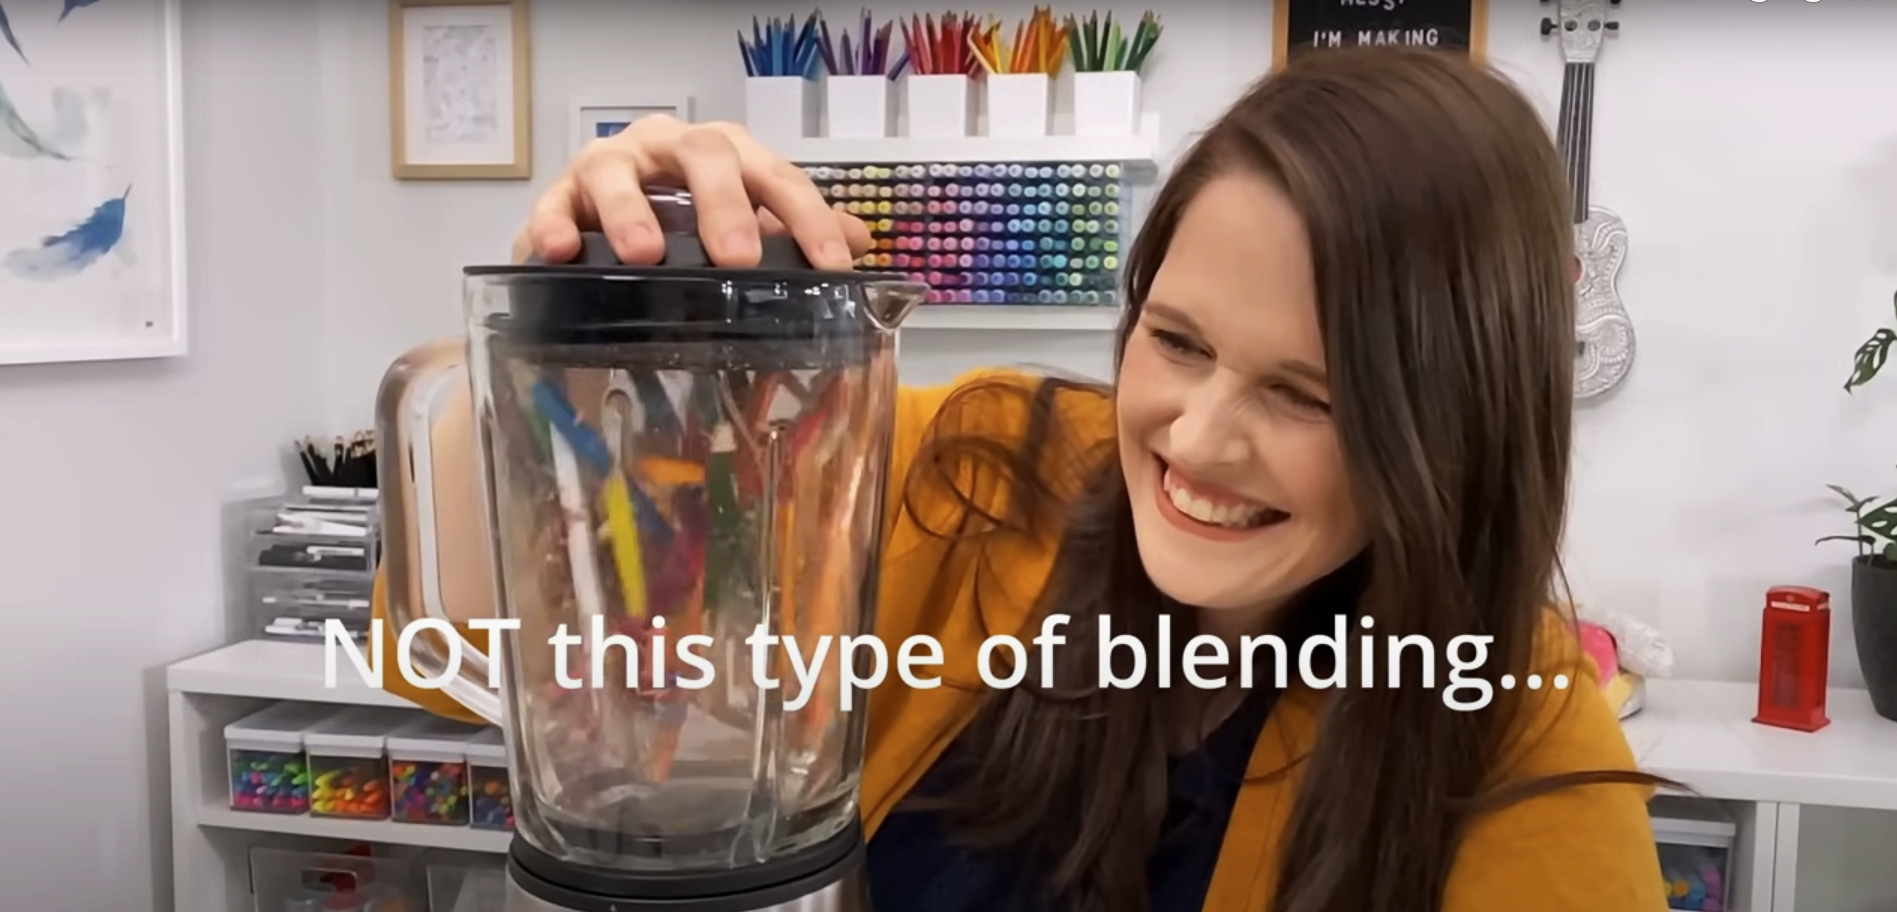 Blending colored pencils in a kitchen blender but we are not talking about this kind of blending